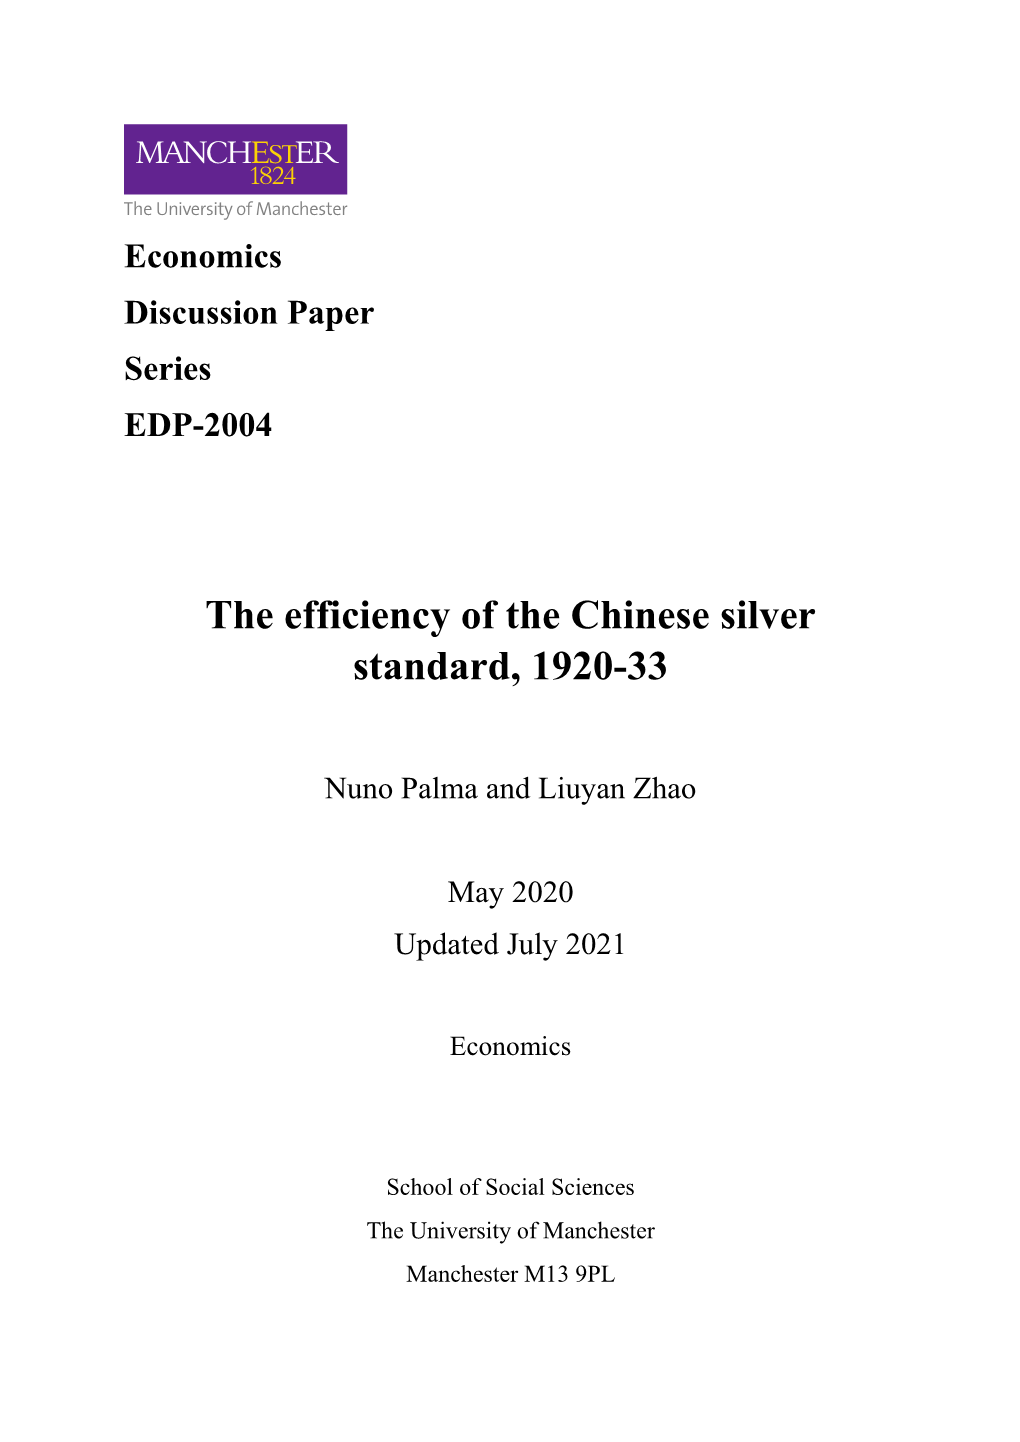 The Efficiency of the Chinese Silver Standard, 1920-33